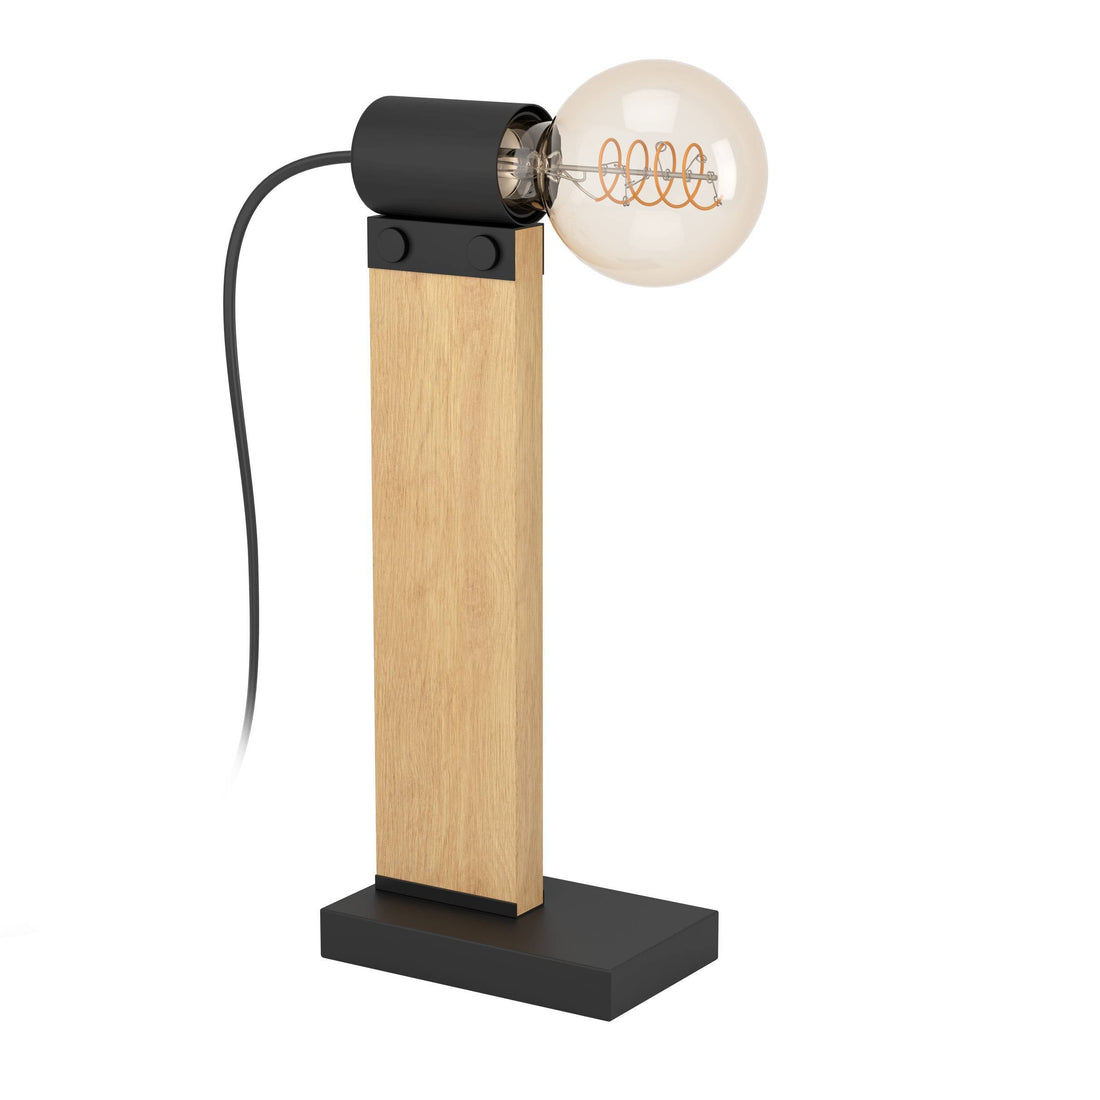 BAILRIGG METAL AND WOOD TABLE LAMP H33CM E27=40W - best price from Maltashopper.com BR420008497